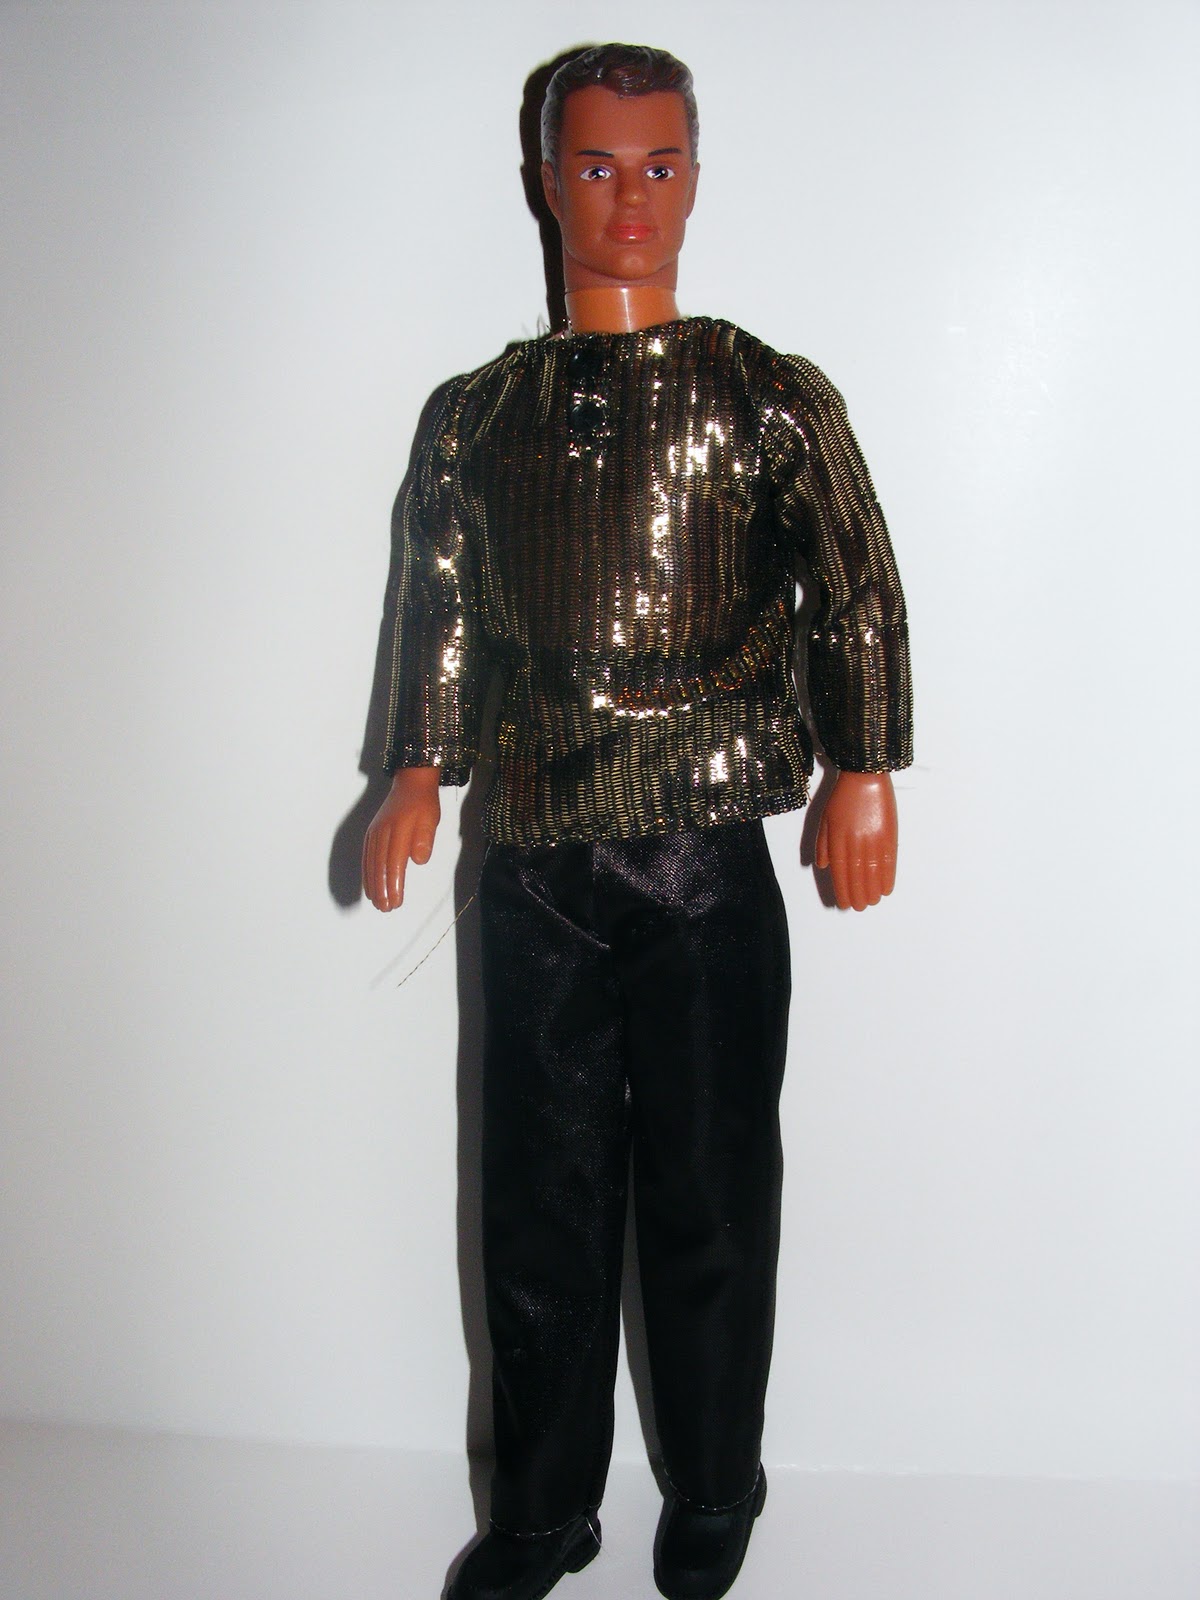 Male Doll World: A Tribute to Hispanice Heritage Month